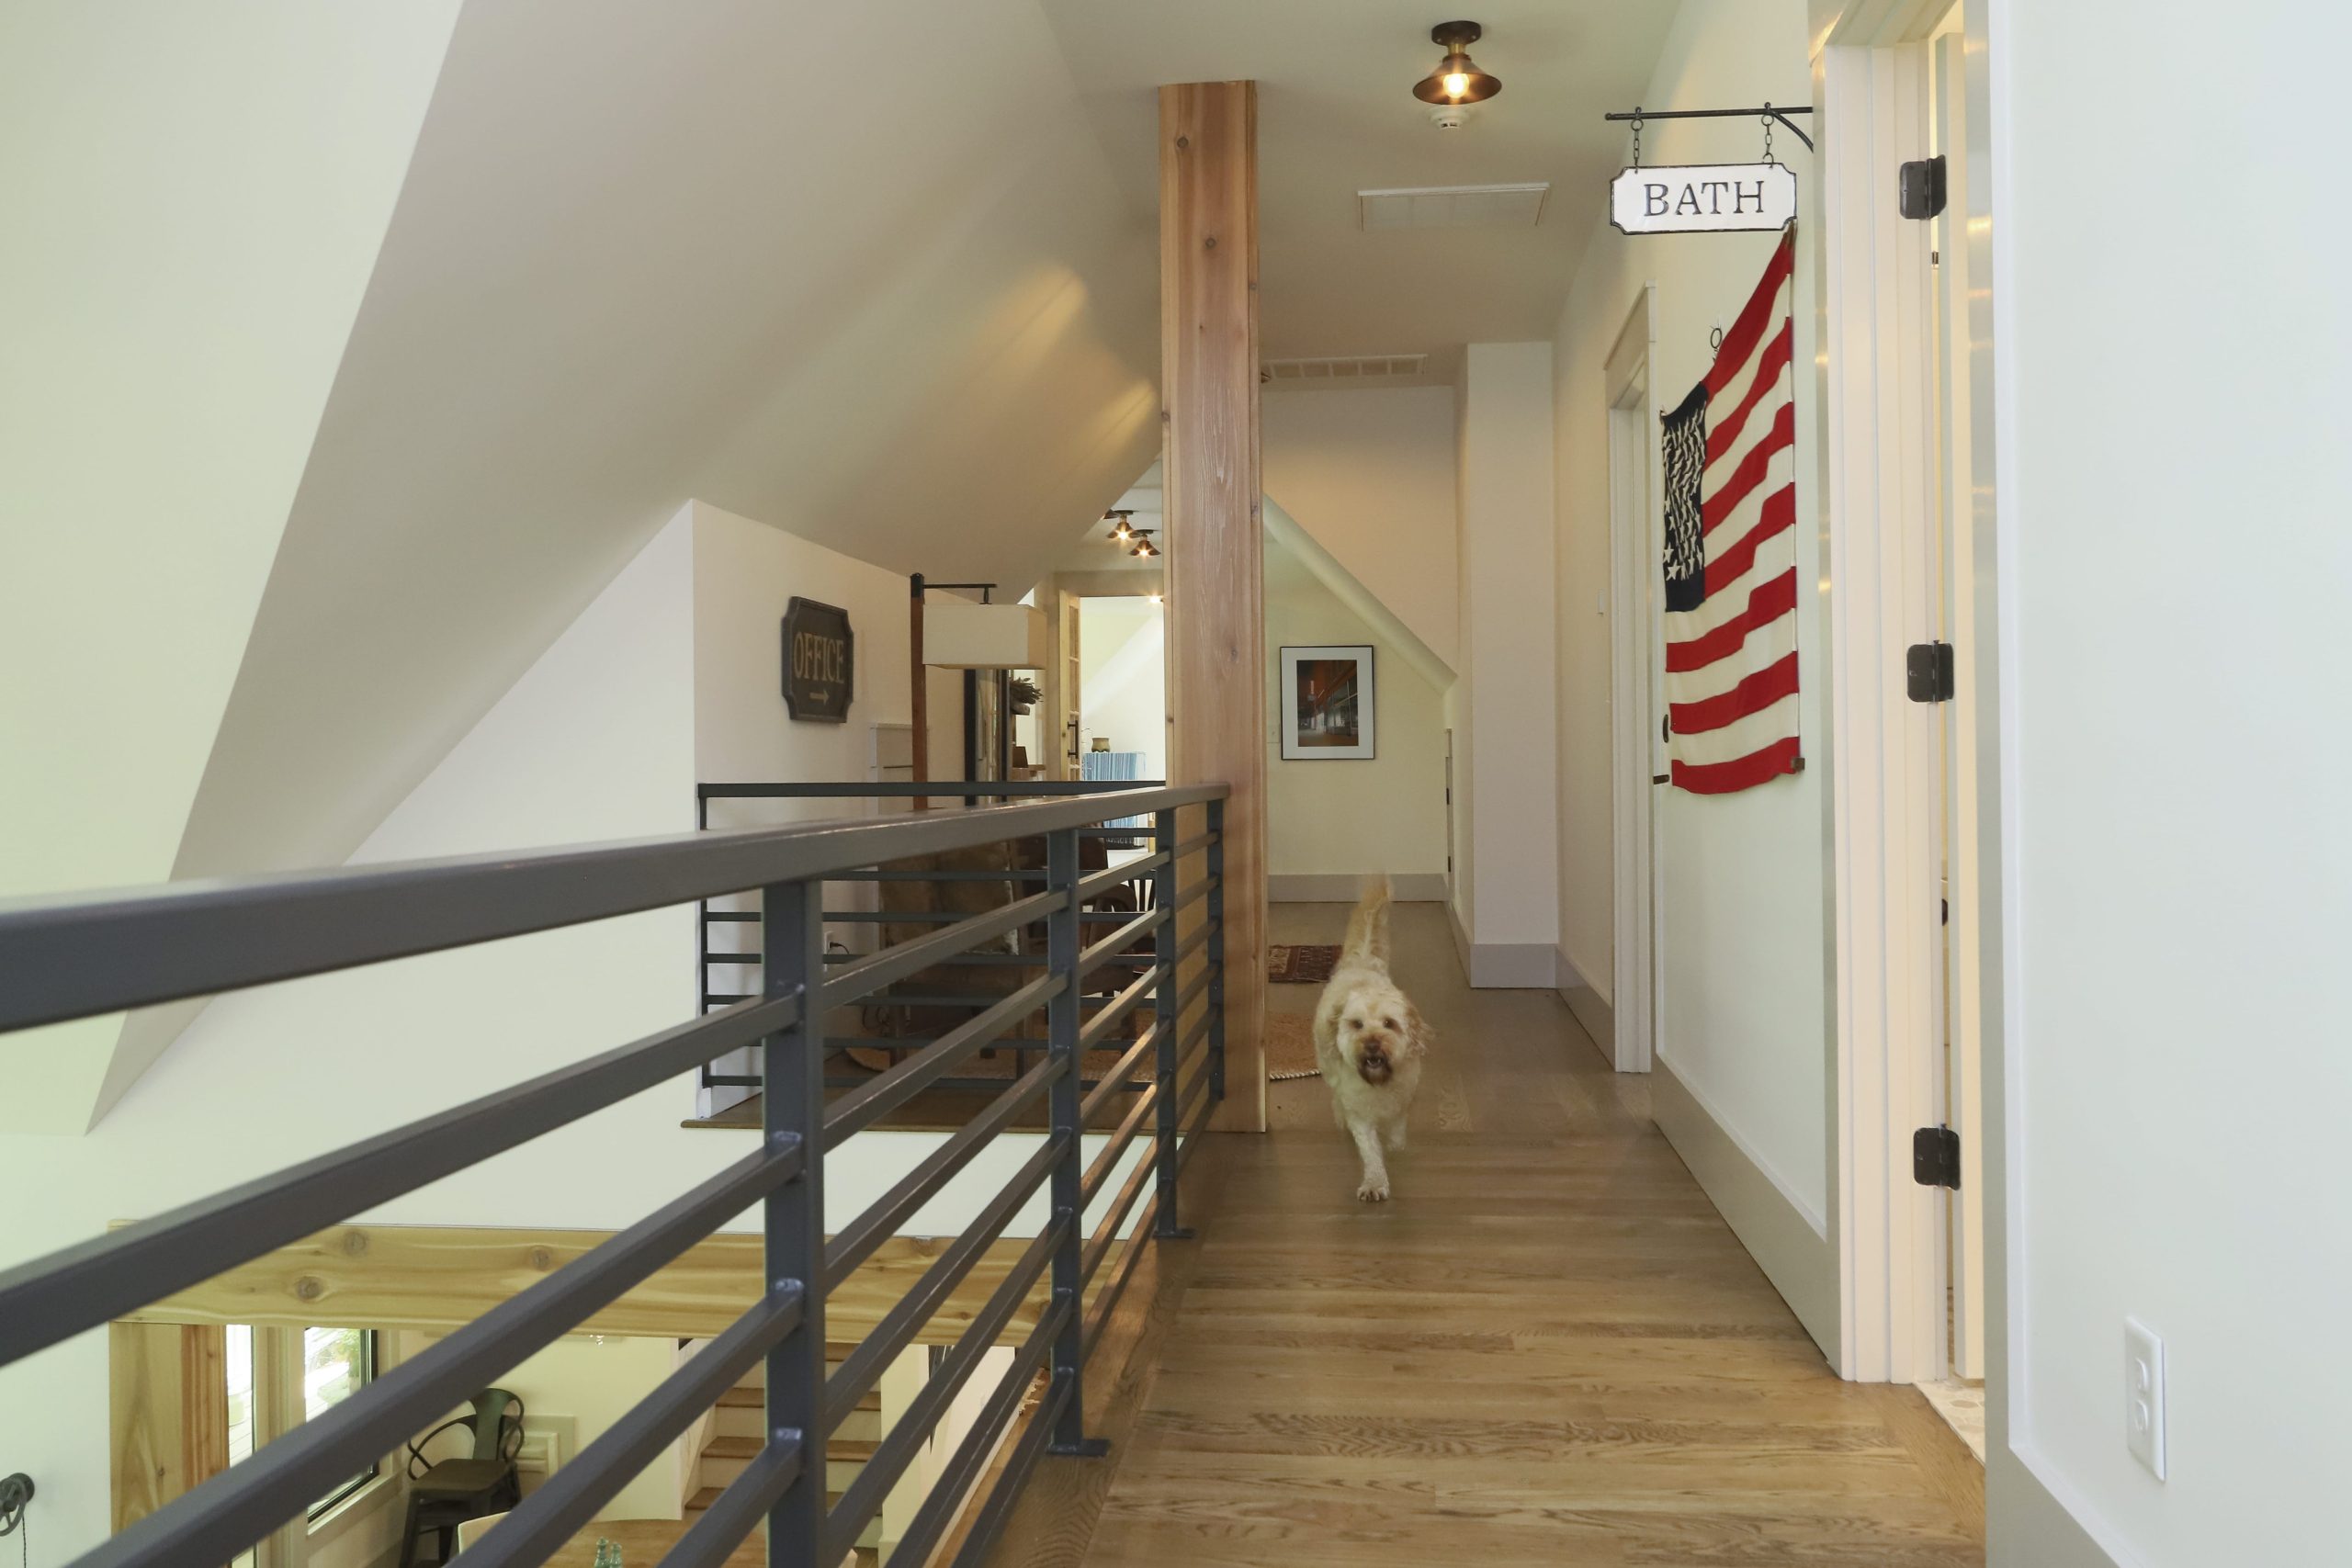 A fluffy dogs runs down the upstairs mezzanine, accented with metal railings and heavy wood structural elements.